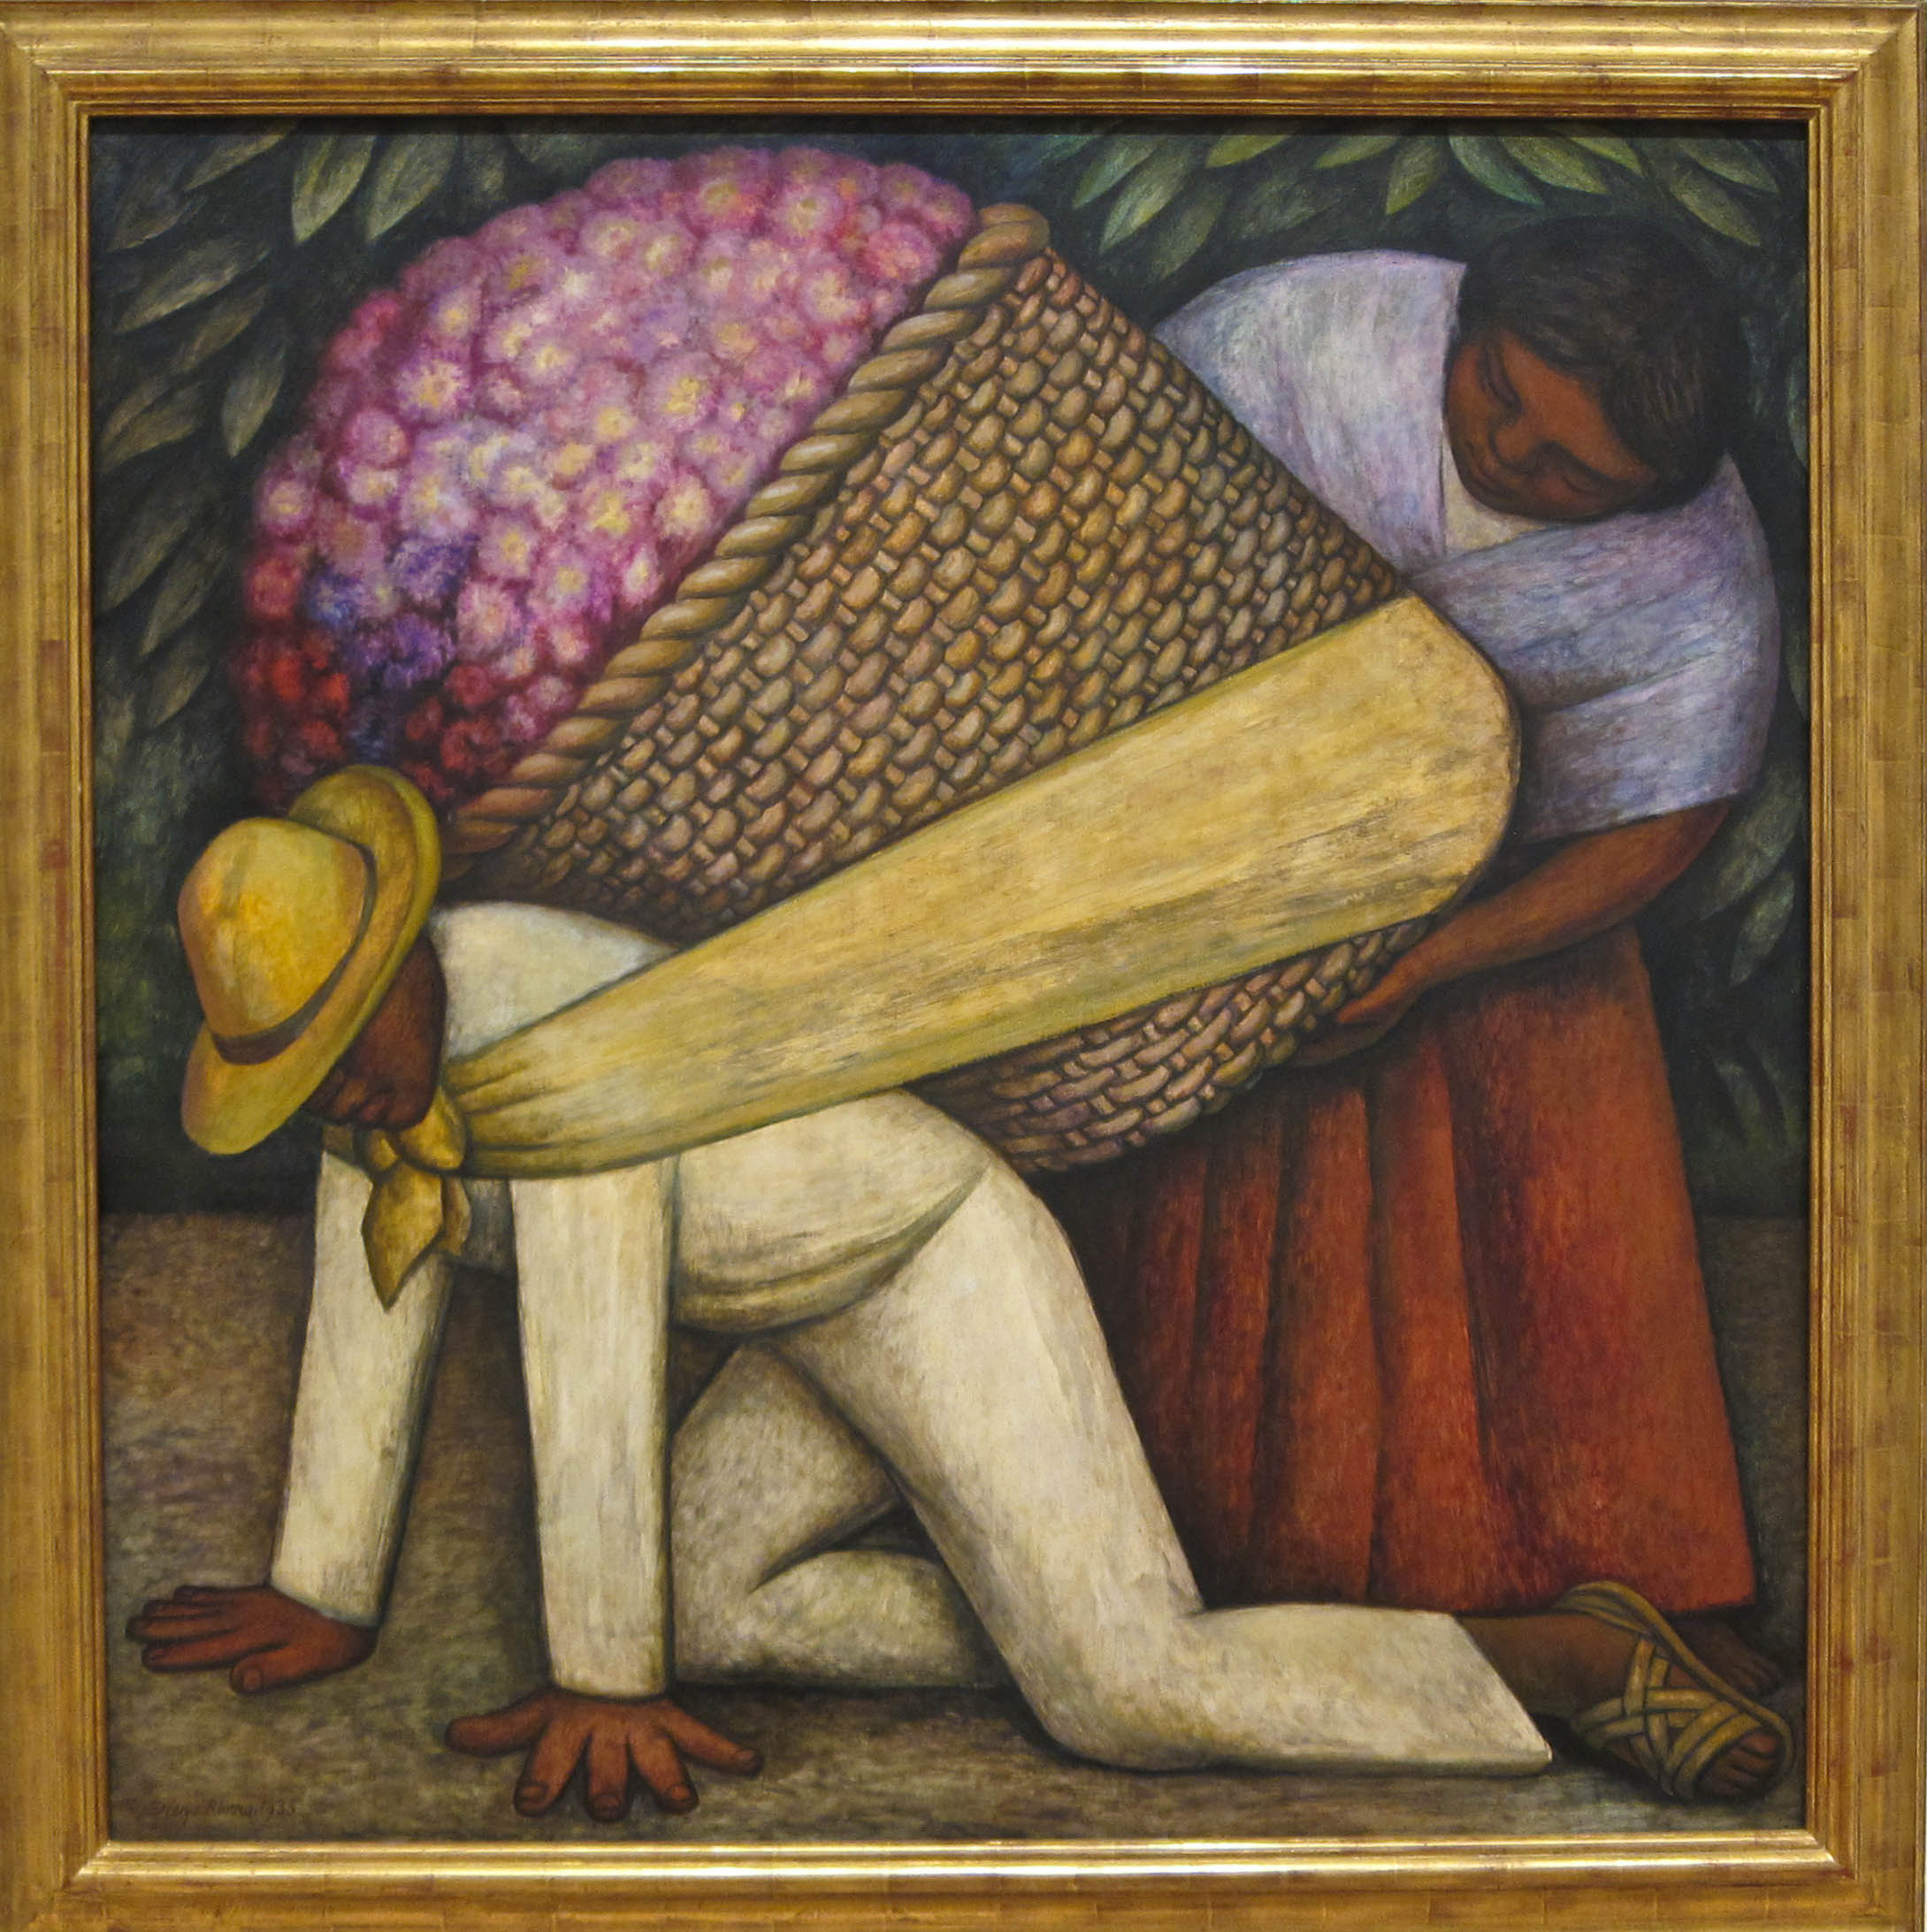 Diego Rivera, The Flower Carrier